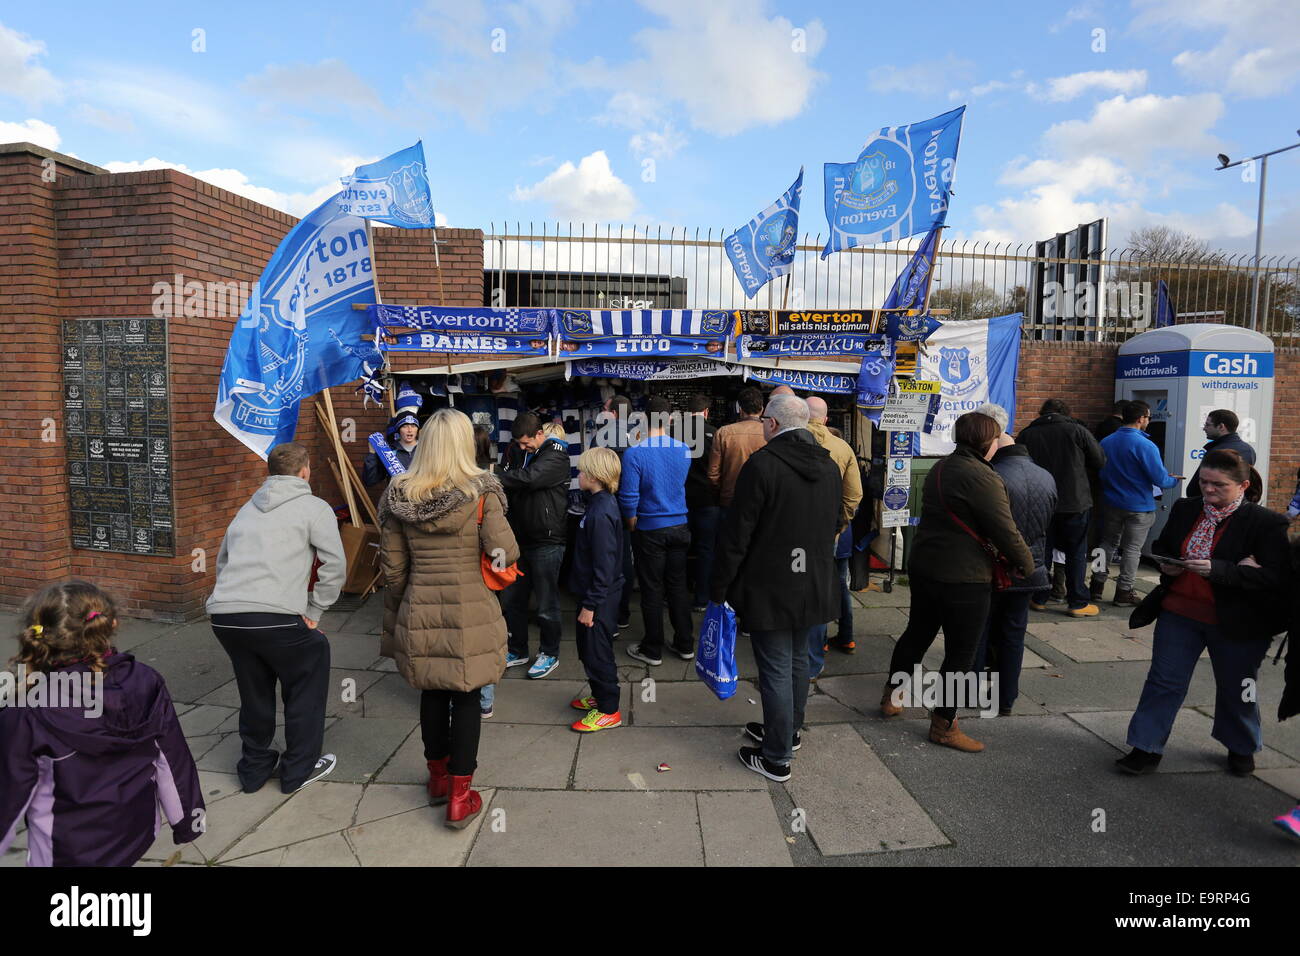 Liverpool, UK. Saturday 01 November 2014  Pictured: A stand selling scarves and flags outside goodison Park.  Re: Premier League Everton v Swansea City FC at Goodison Park, Liverpool, Merseyside, UK. Credit:  D Legakis/Alamy Live News Stock Photo